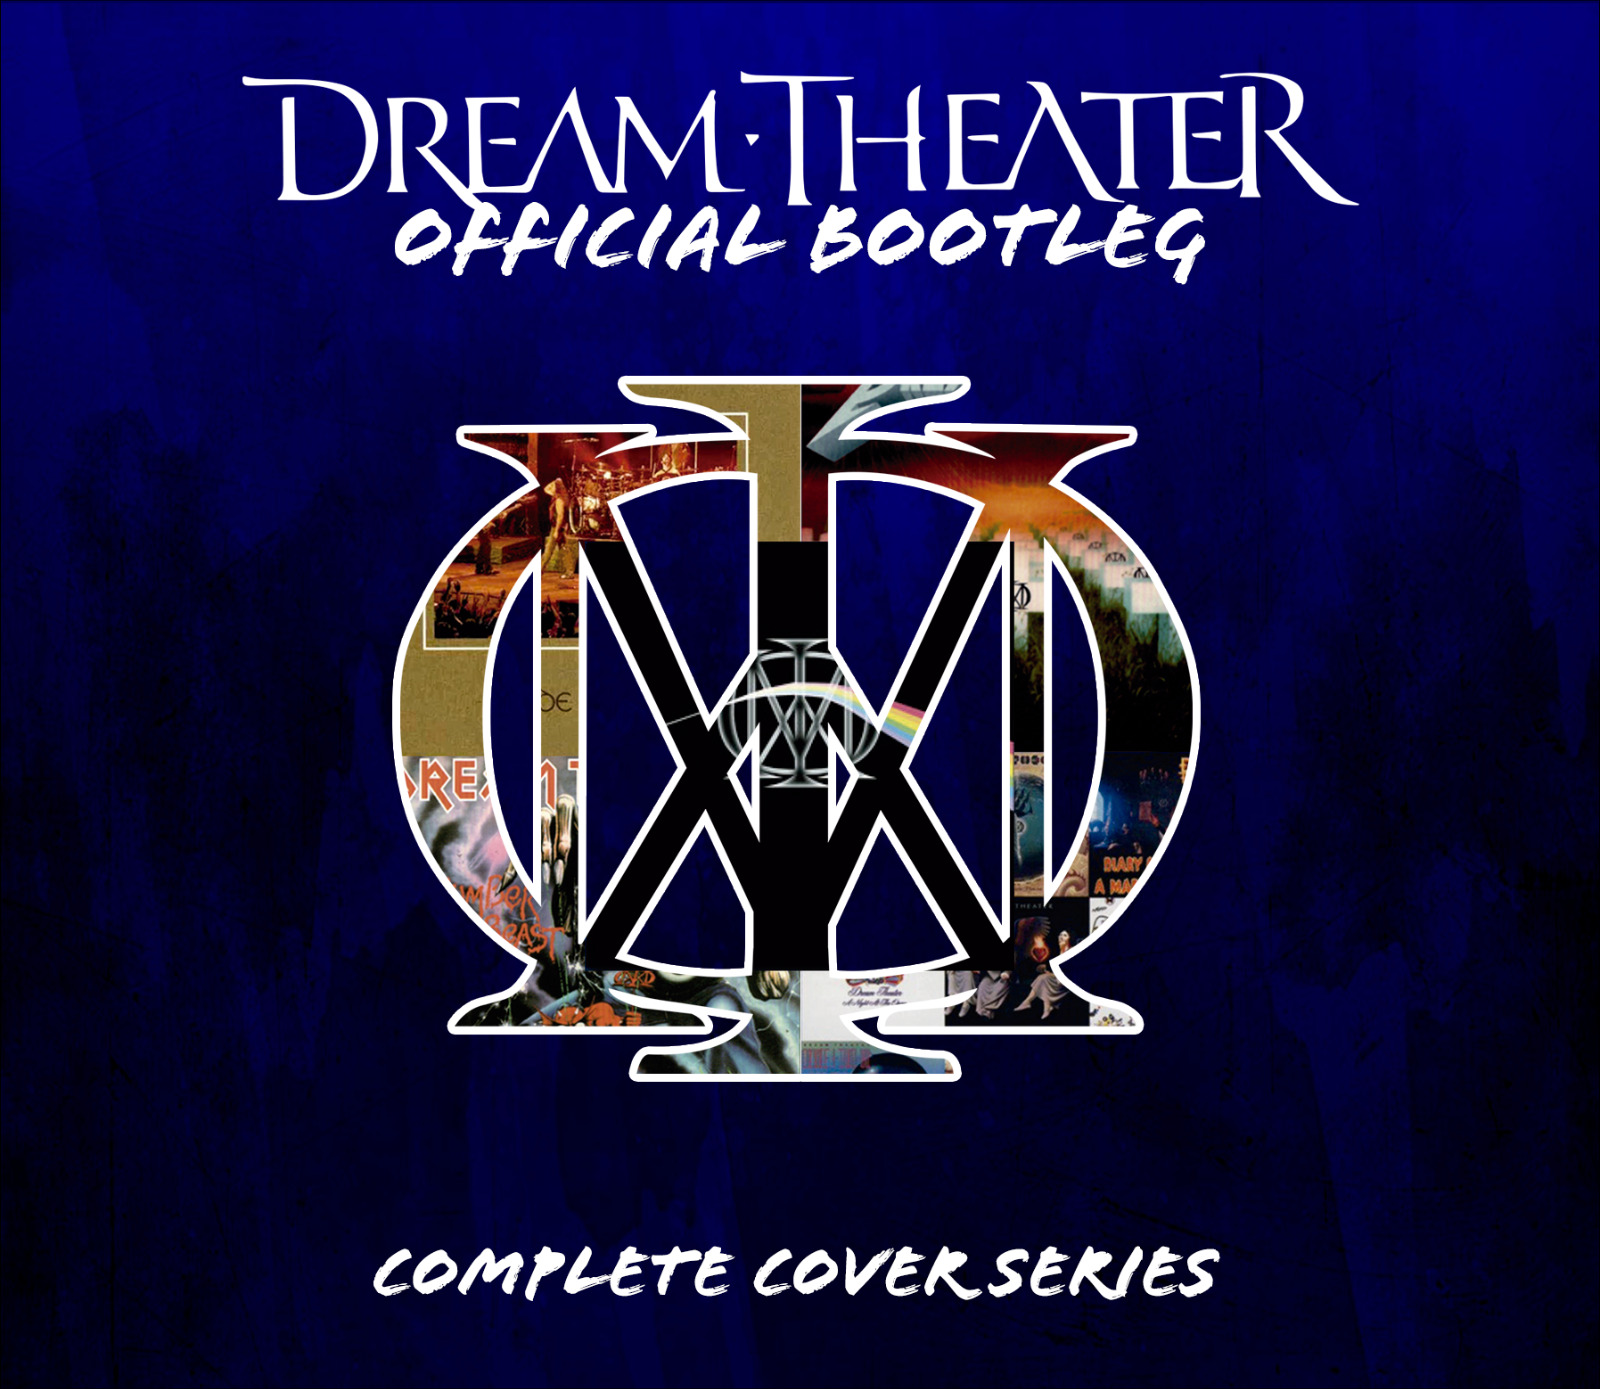 DREAM THEATER  Complete cover series    6CD+1DVD BOX SET